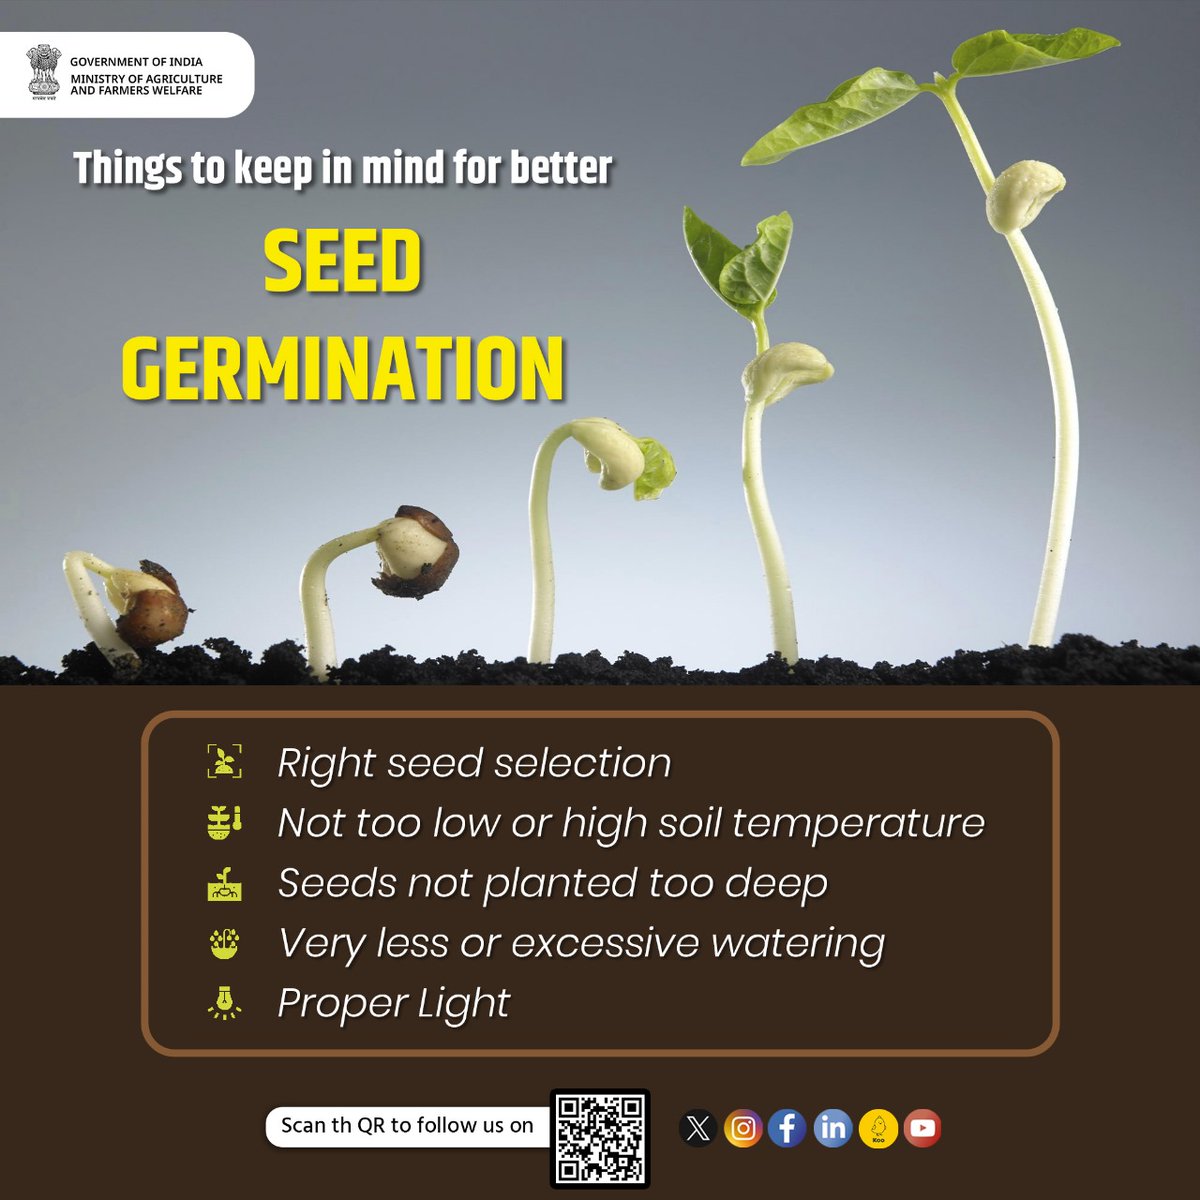 Quality #Seeds for Quality Produce

Seed germination plays a vital role in the transition from seed to #crop. Better seed germination results in better yields, provided certain factors are considered. Here are a few key aspects to keep in mind for a better seed #germination.